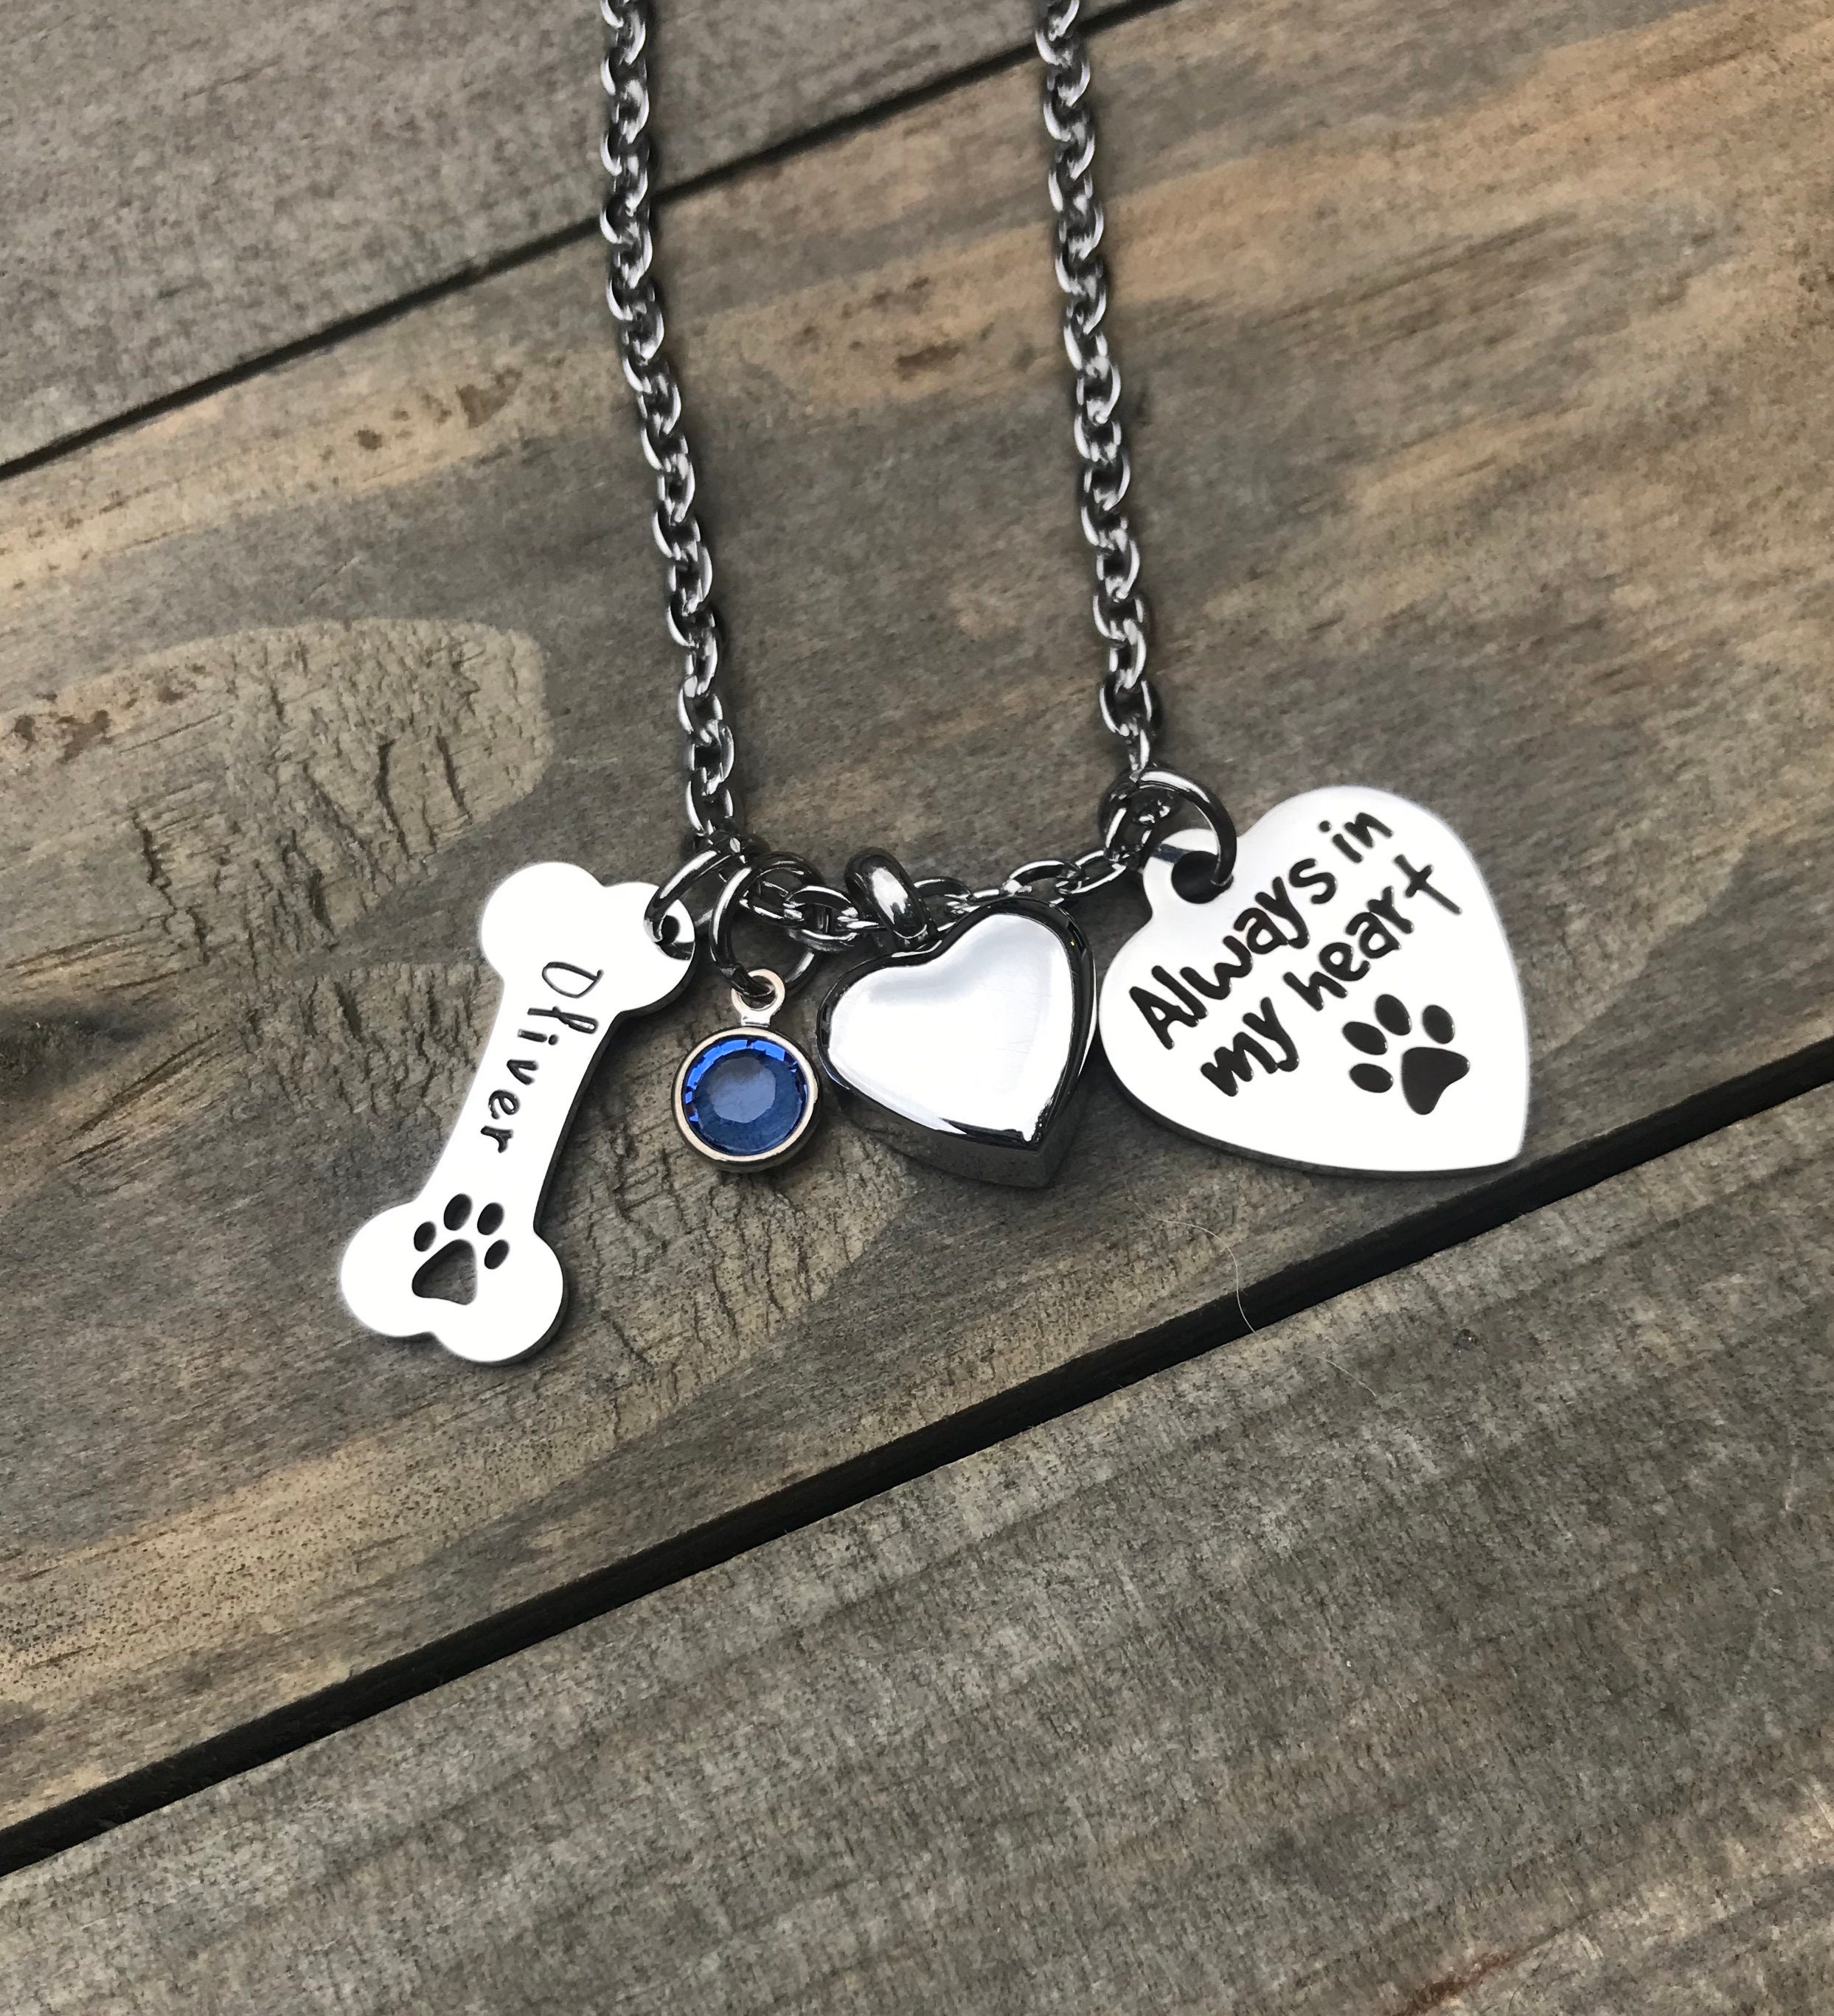 Pet cremation jewelry pet urn ashes necklace pet memorial necklace